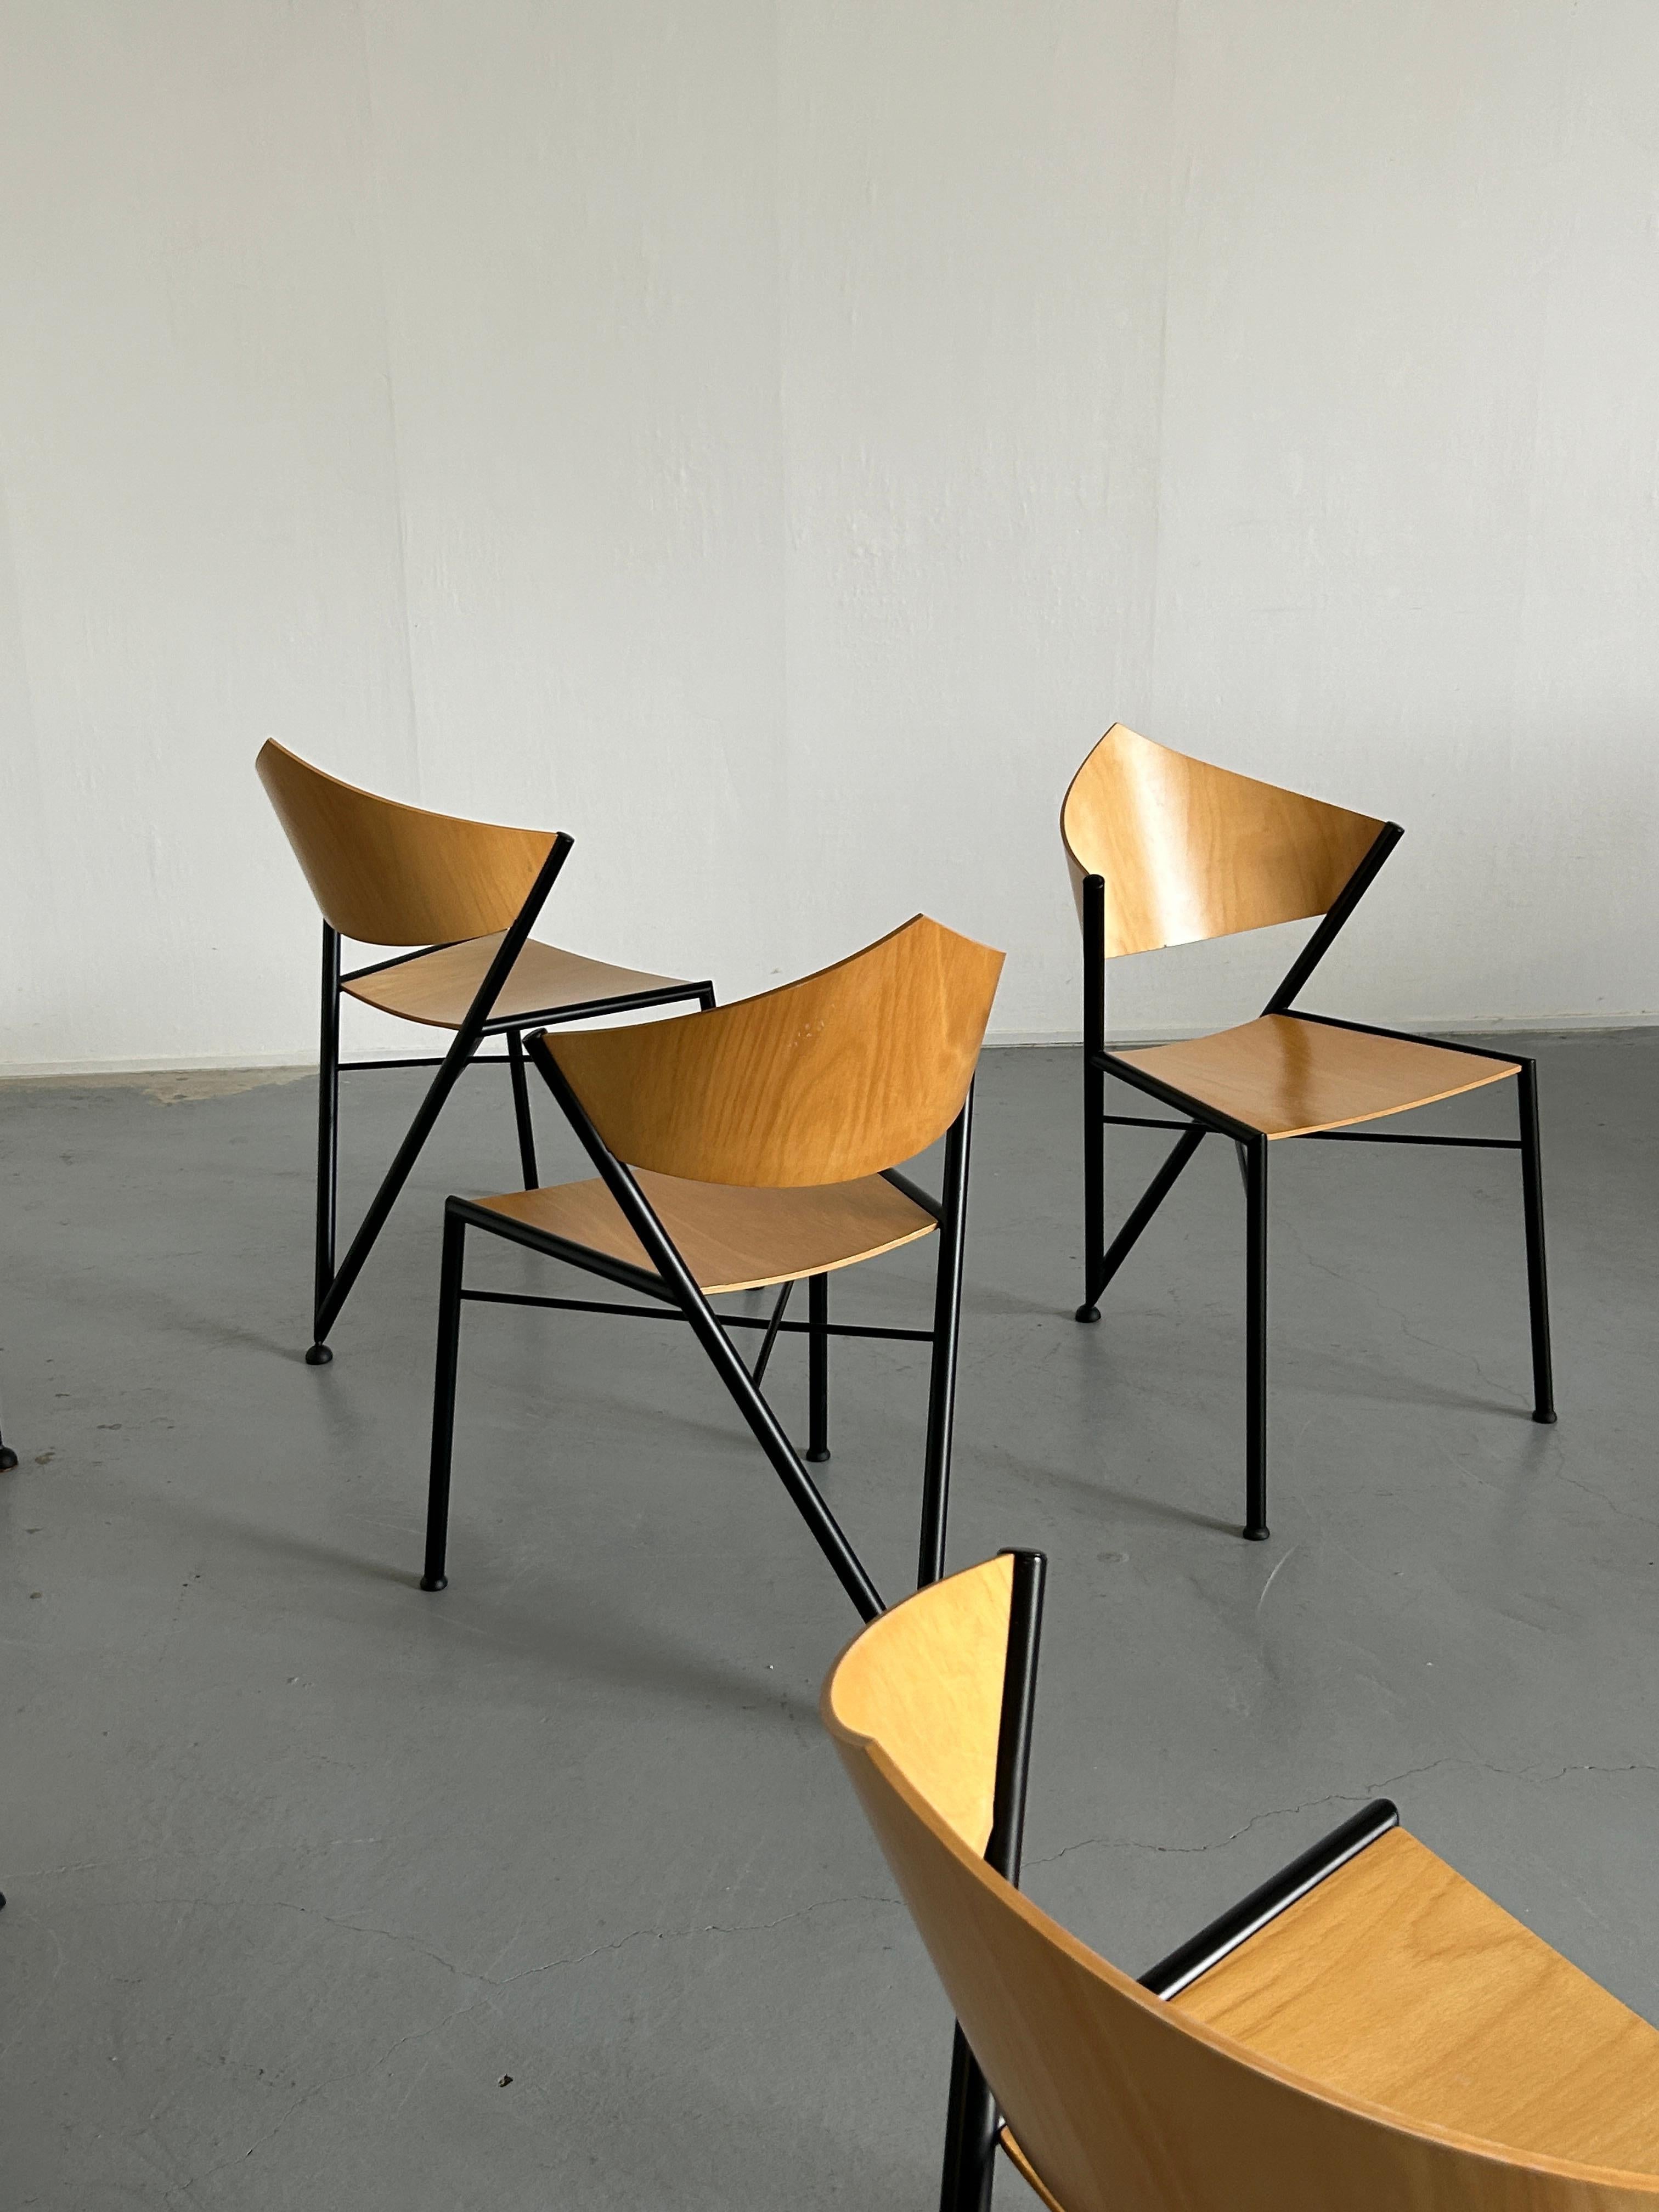 1 of 6 Postmodern Metal Framed Plywood Chairs, Memphis Design, 1980s Italy 2